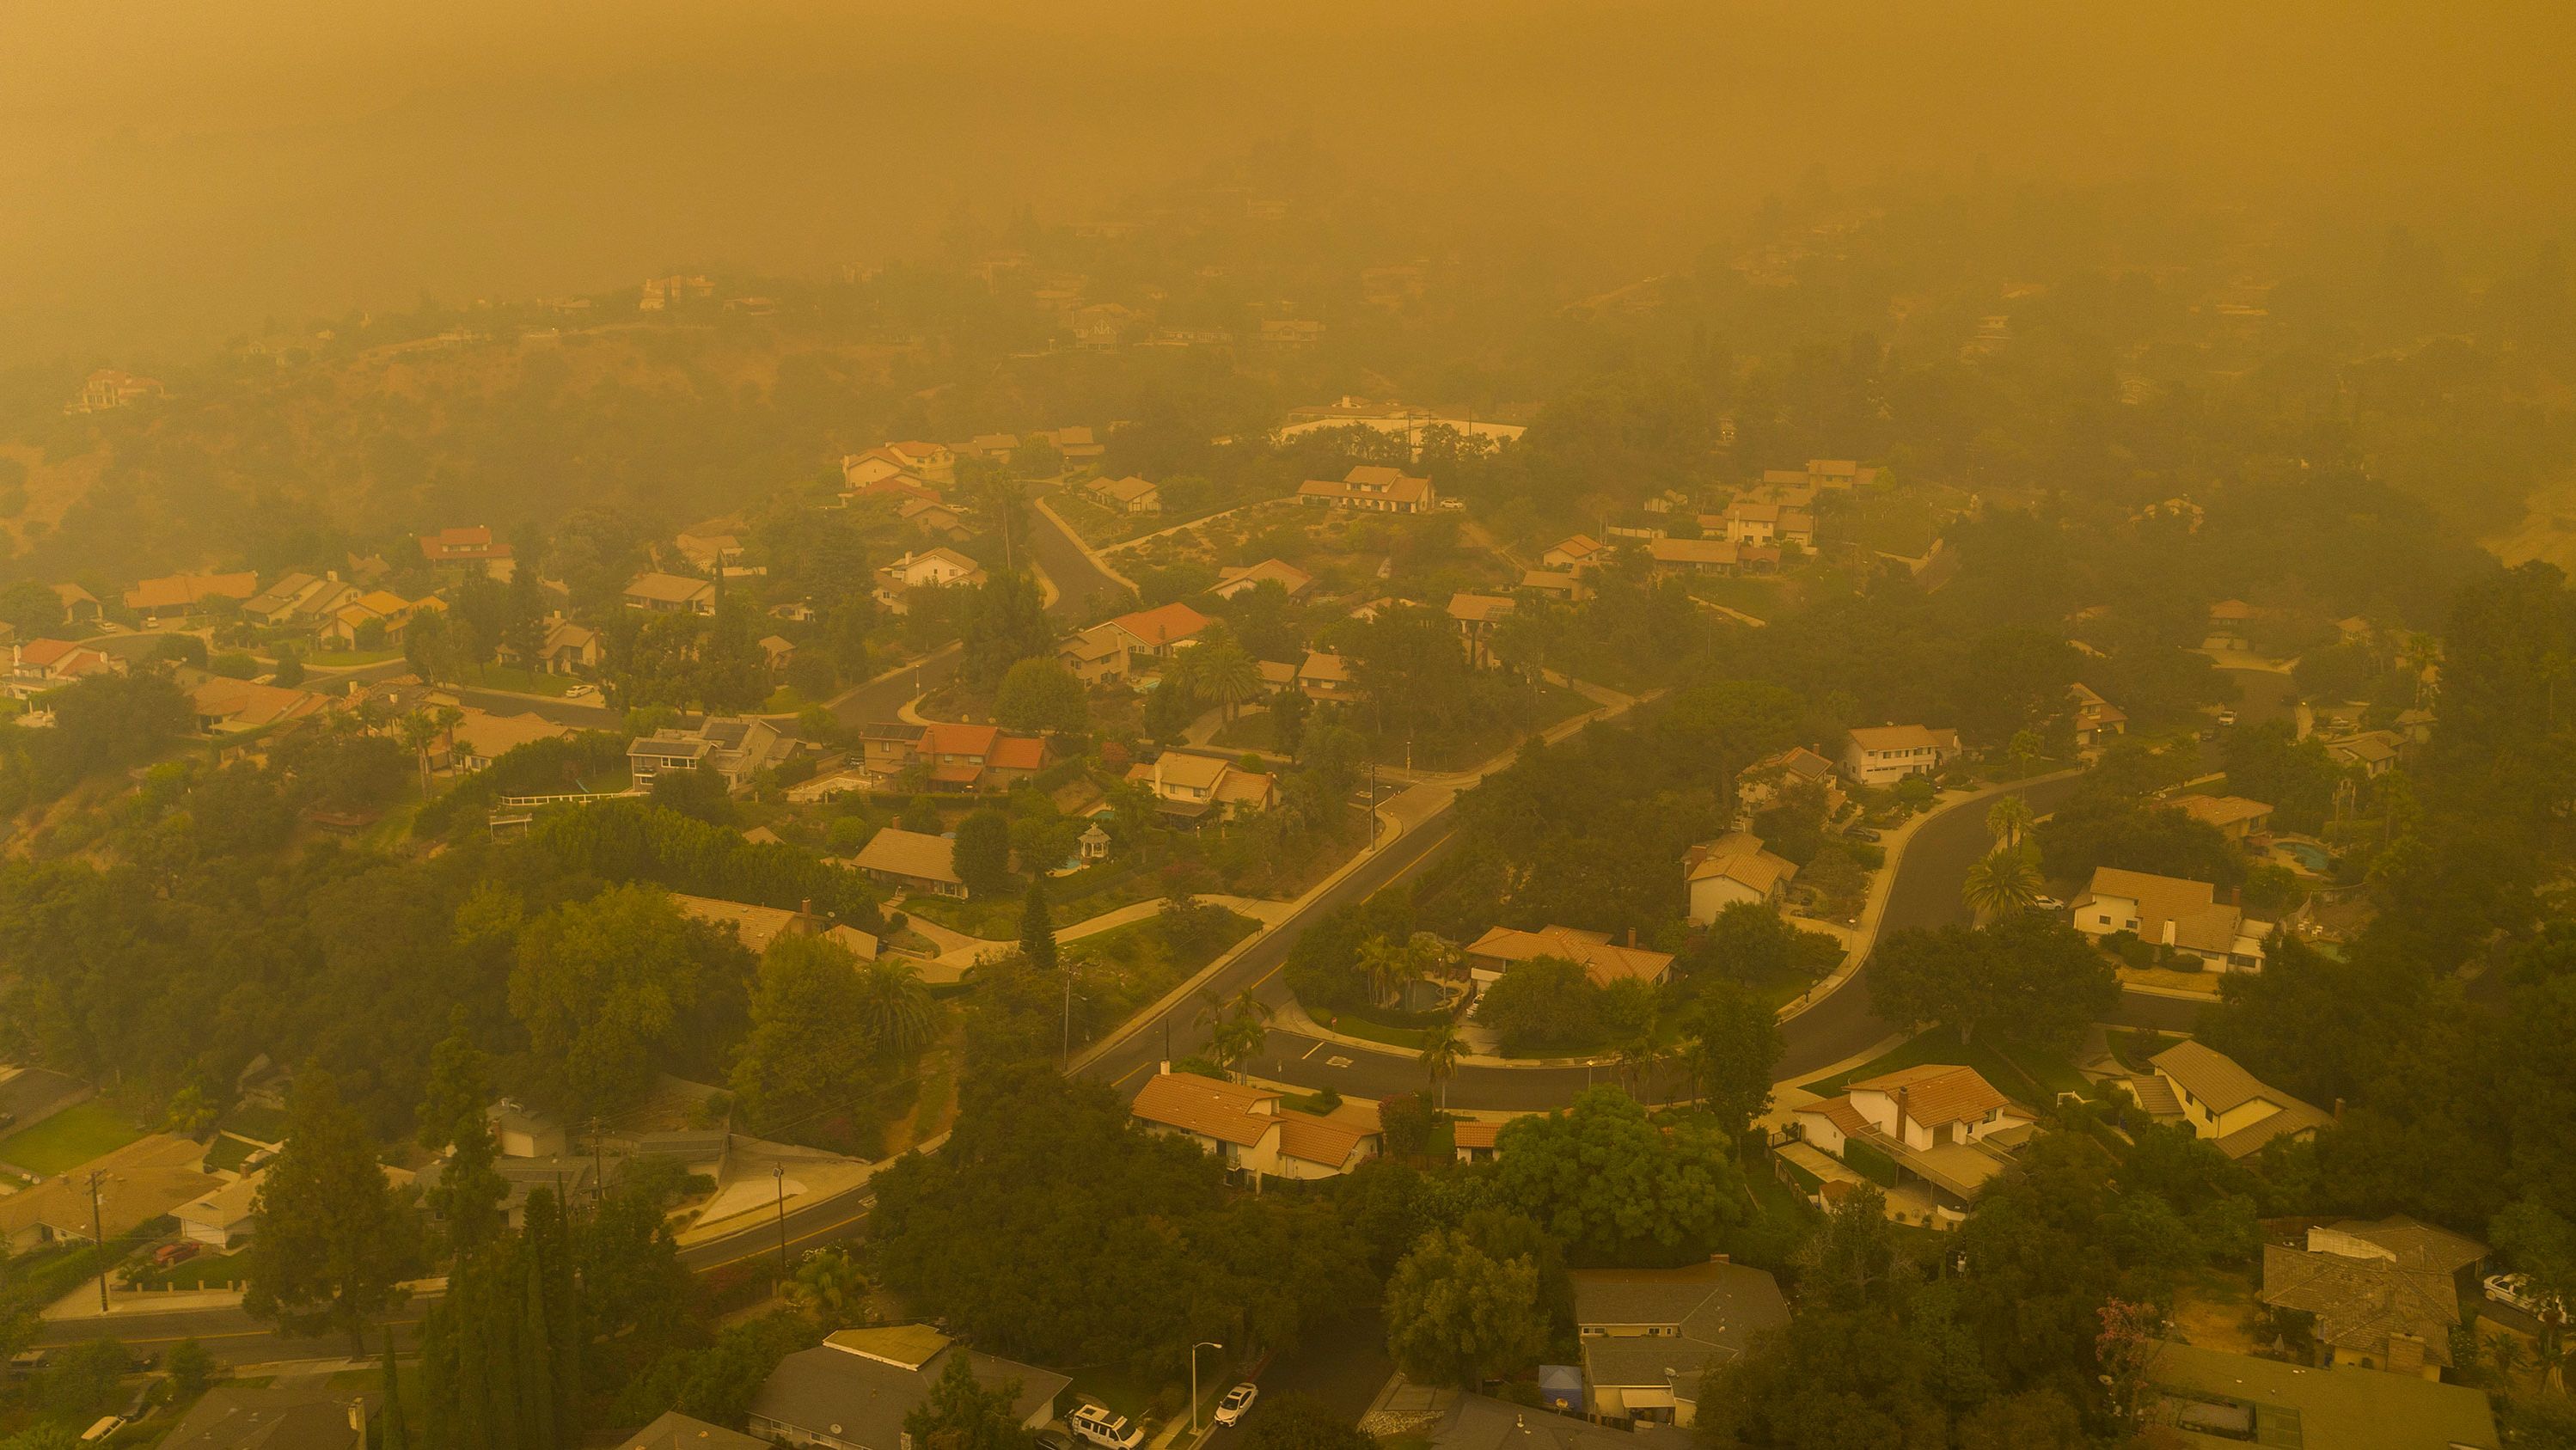 An aerial view shows neighborhoods in Monrovia, California shrouded in smoke as the Bobcat Fire advanced on September 13.